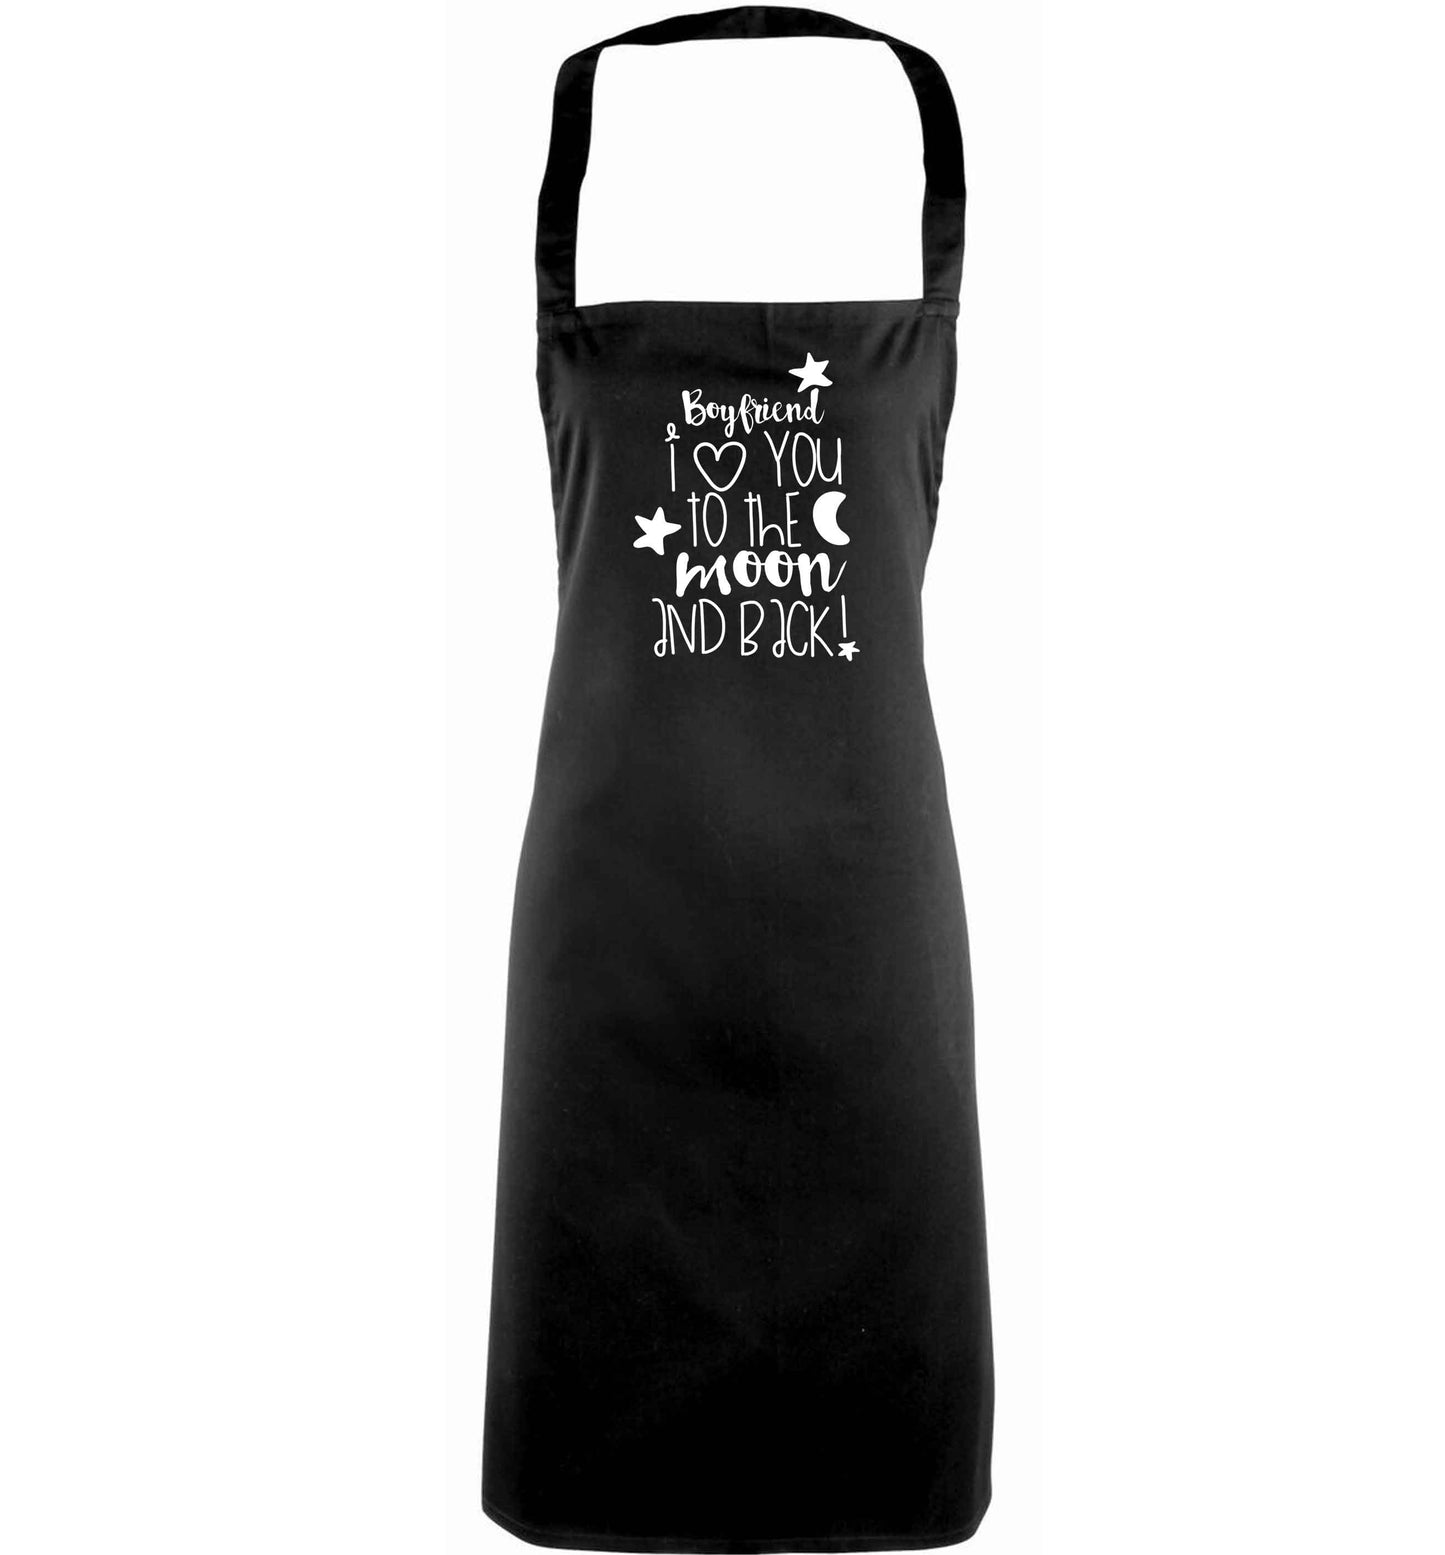 Boyfriend I love you to the moon and back adults black apron